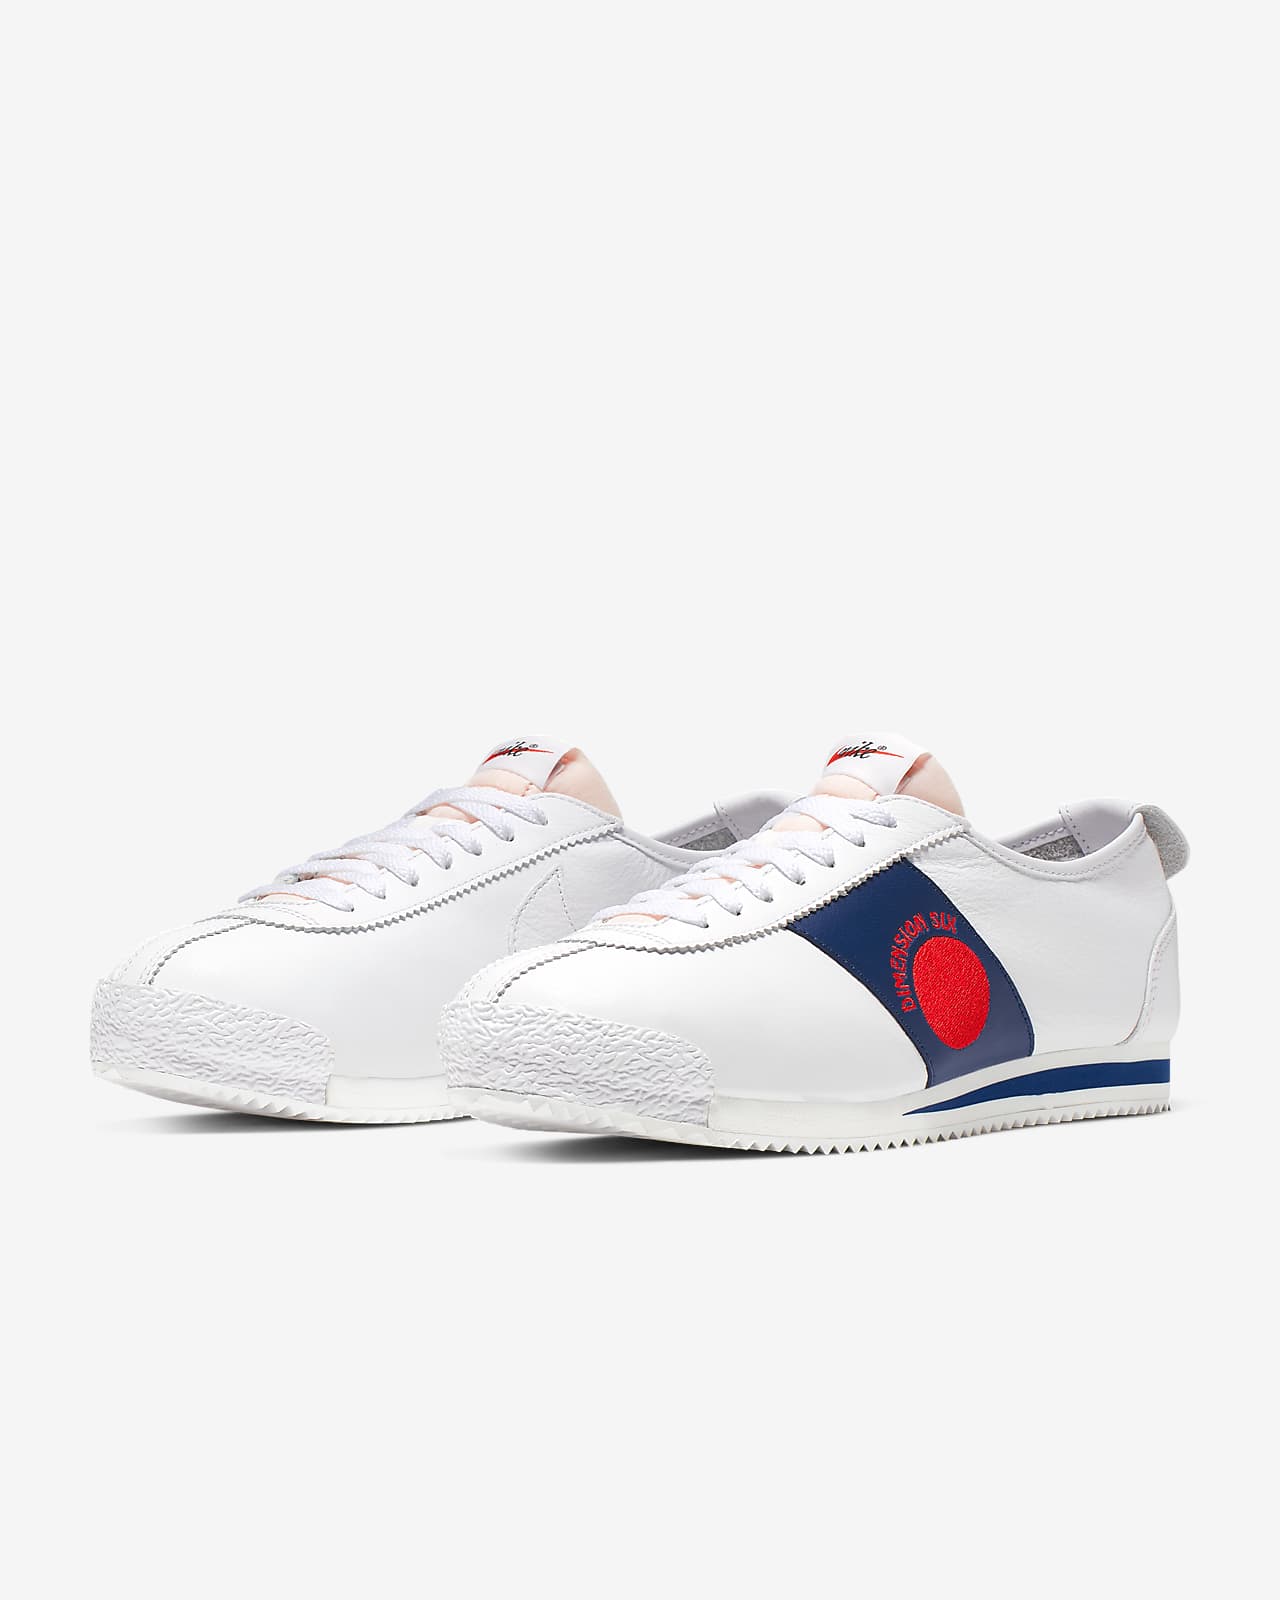 nike cortez 72 for sale